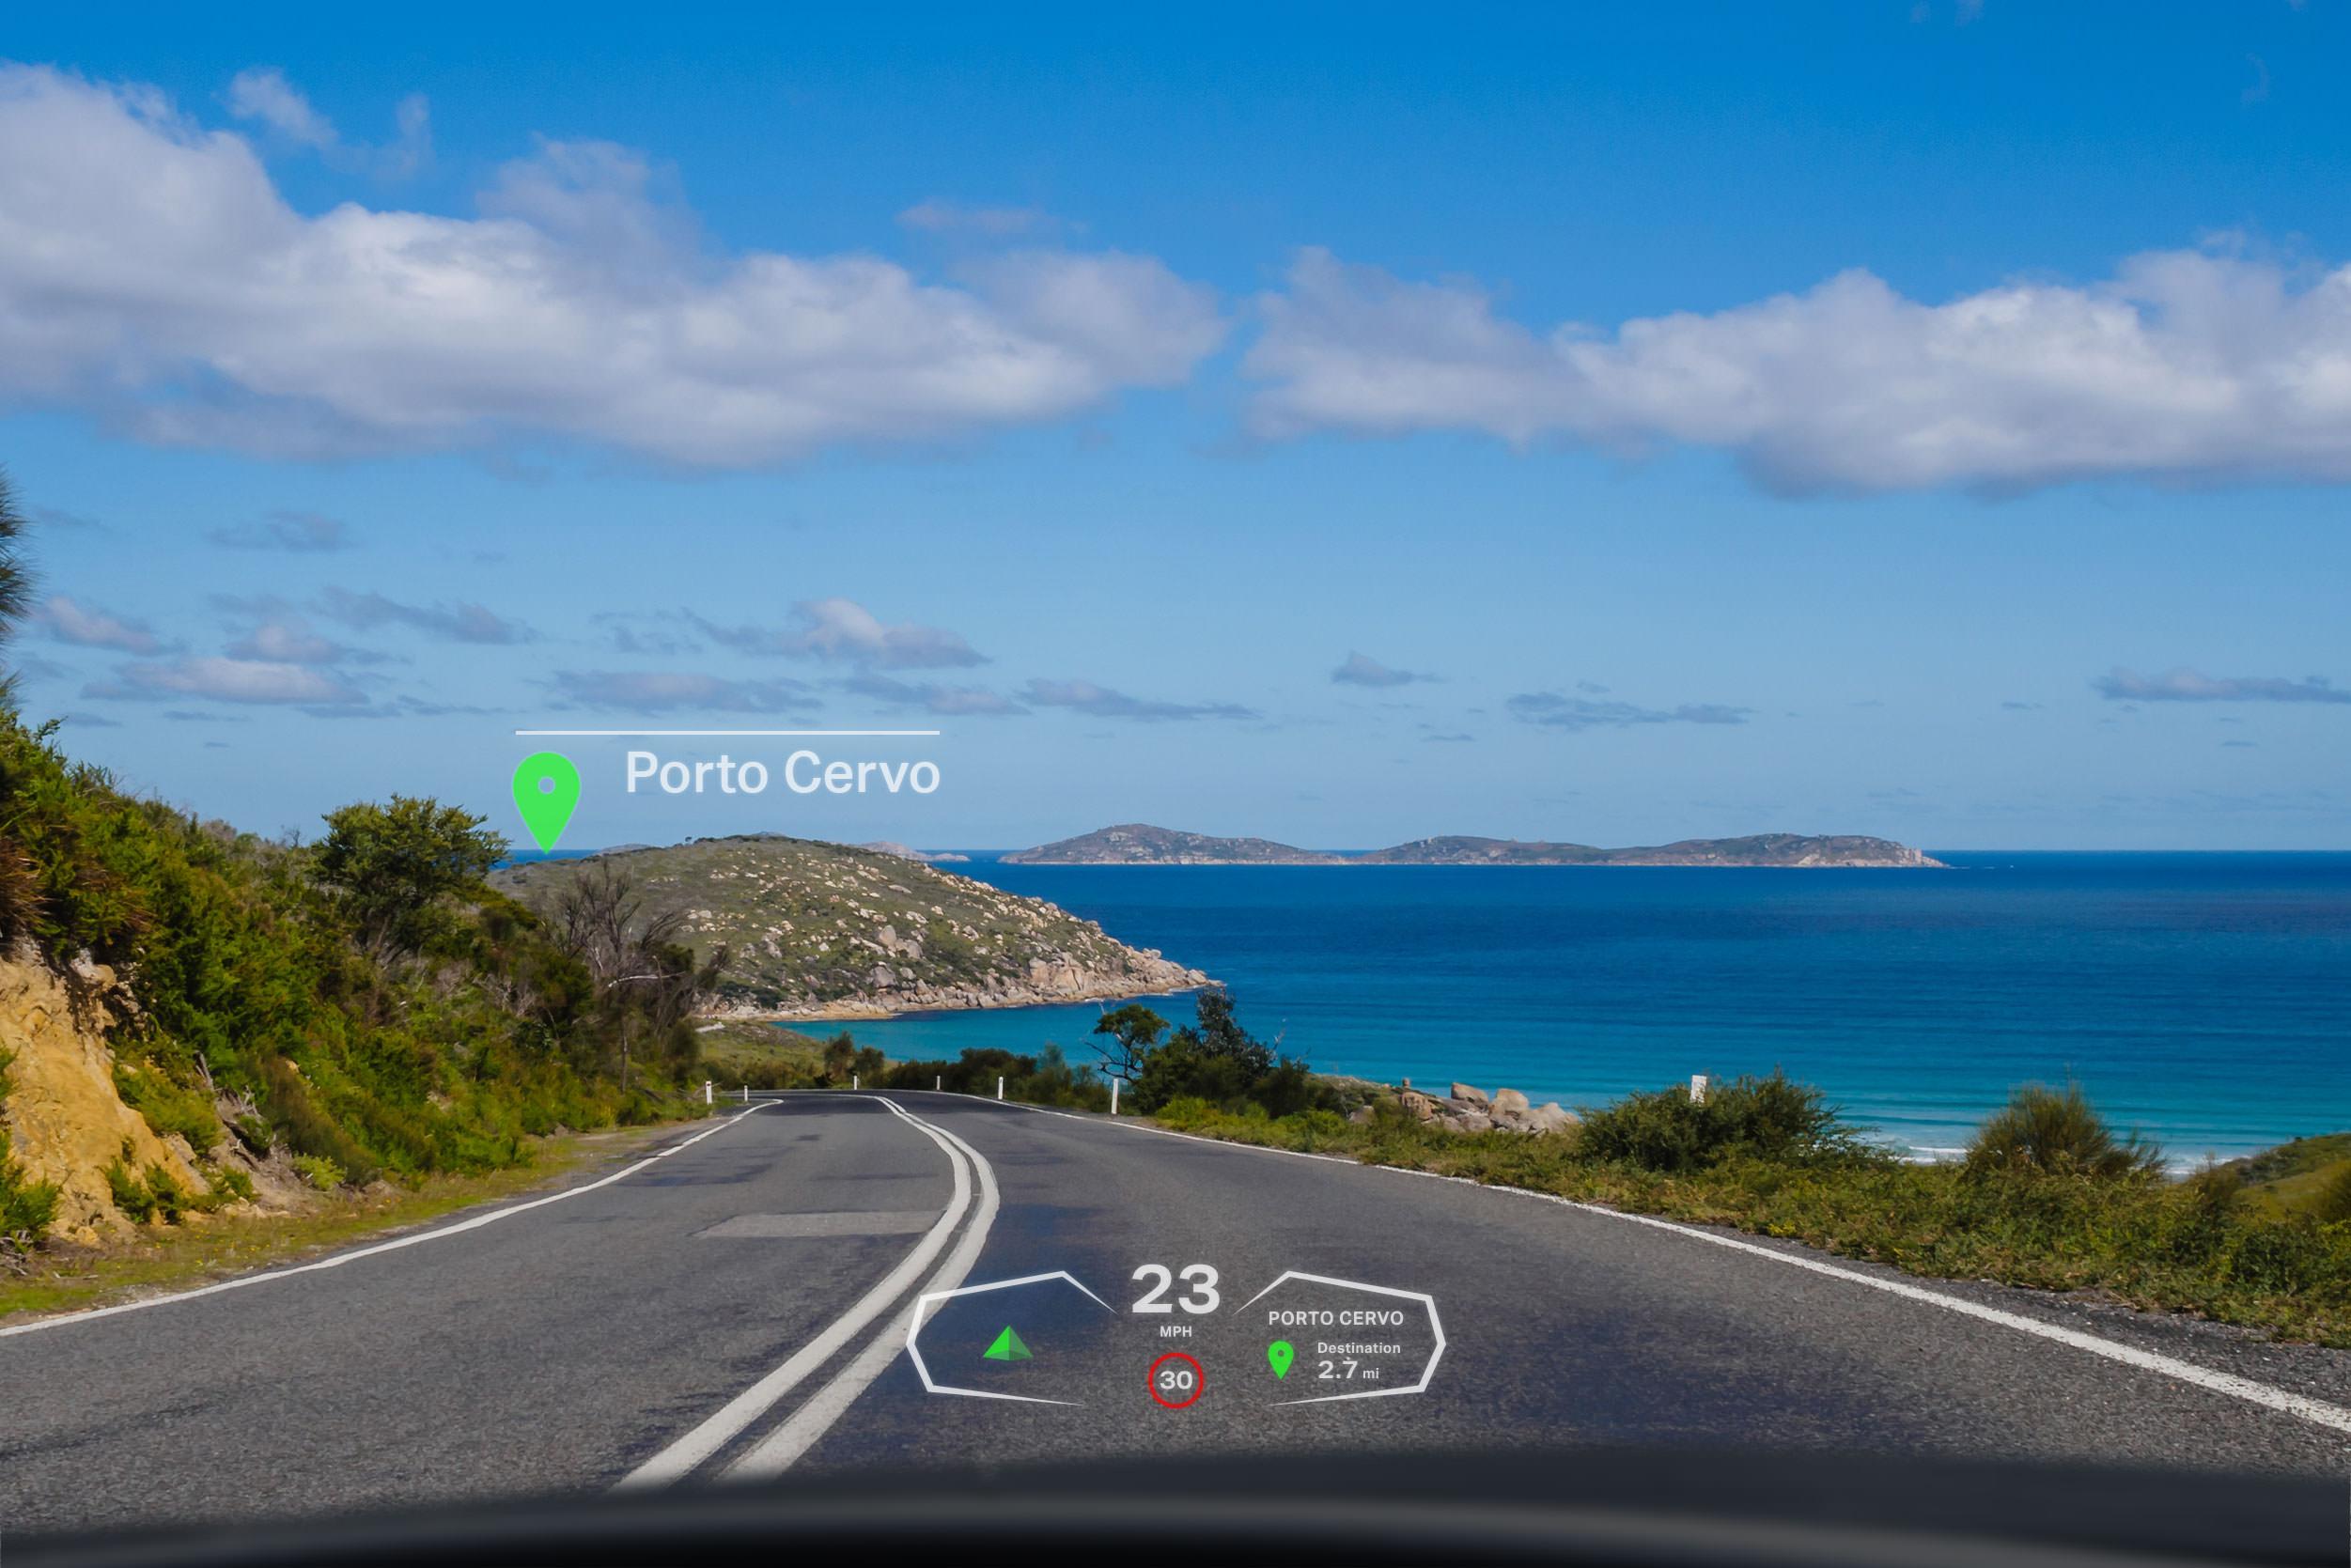 Envisics Takes the Lead in Vehicle Holographic Head Up Displays (HUDs) - Envisics